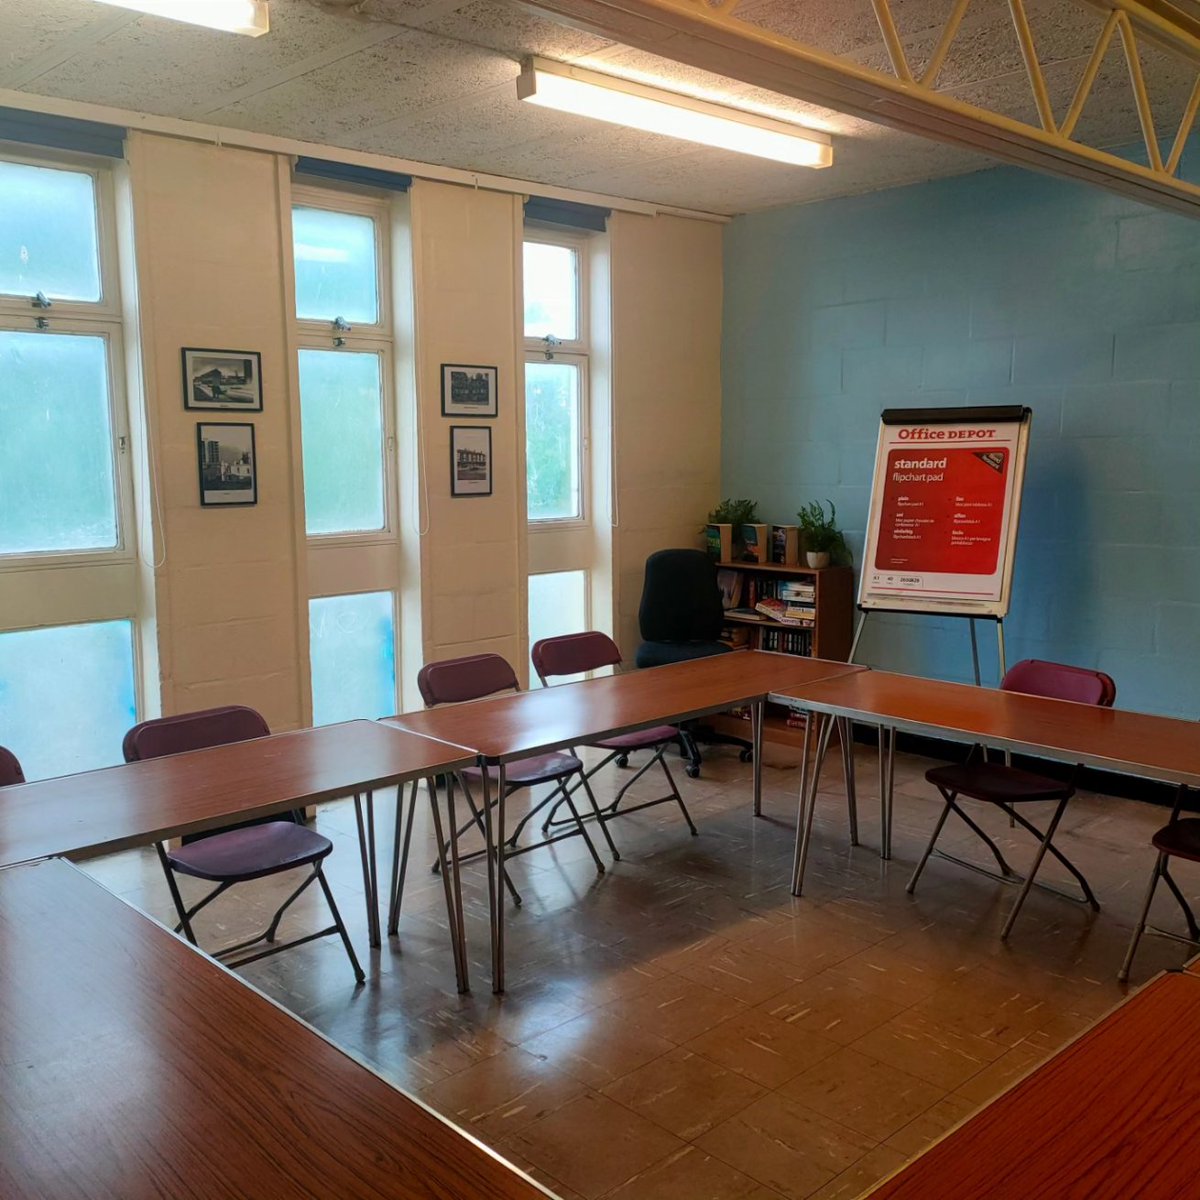 Take a look at the space we used for our parents in business networking event held roughly 2 weeks ago, at the Glyndon Community Centre in Plumstead, South London. 

Always grateful for the love shown by members of the local community!

#CommunityCentre
#ParentsInBusiness